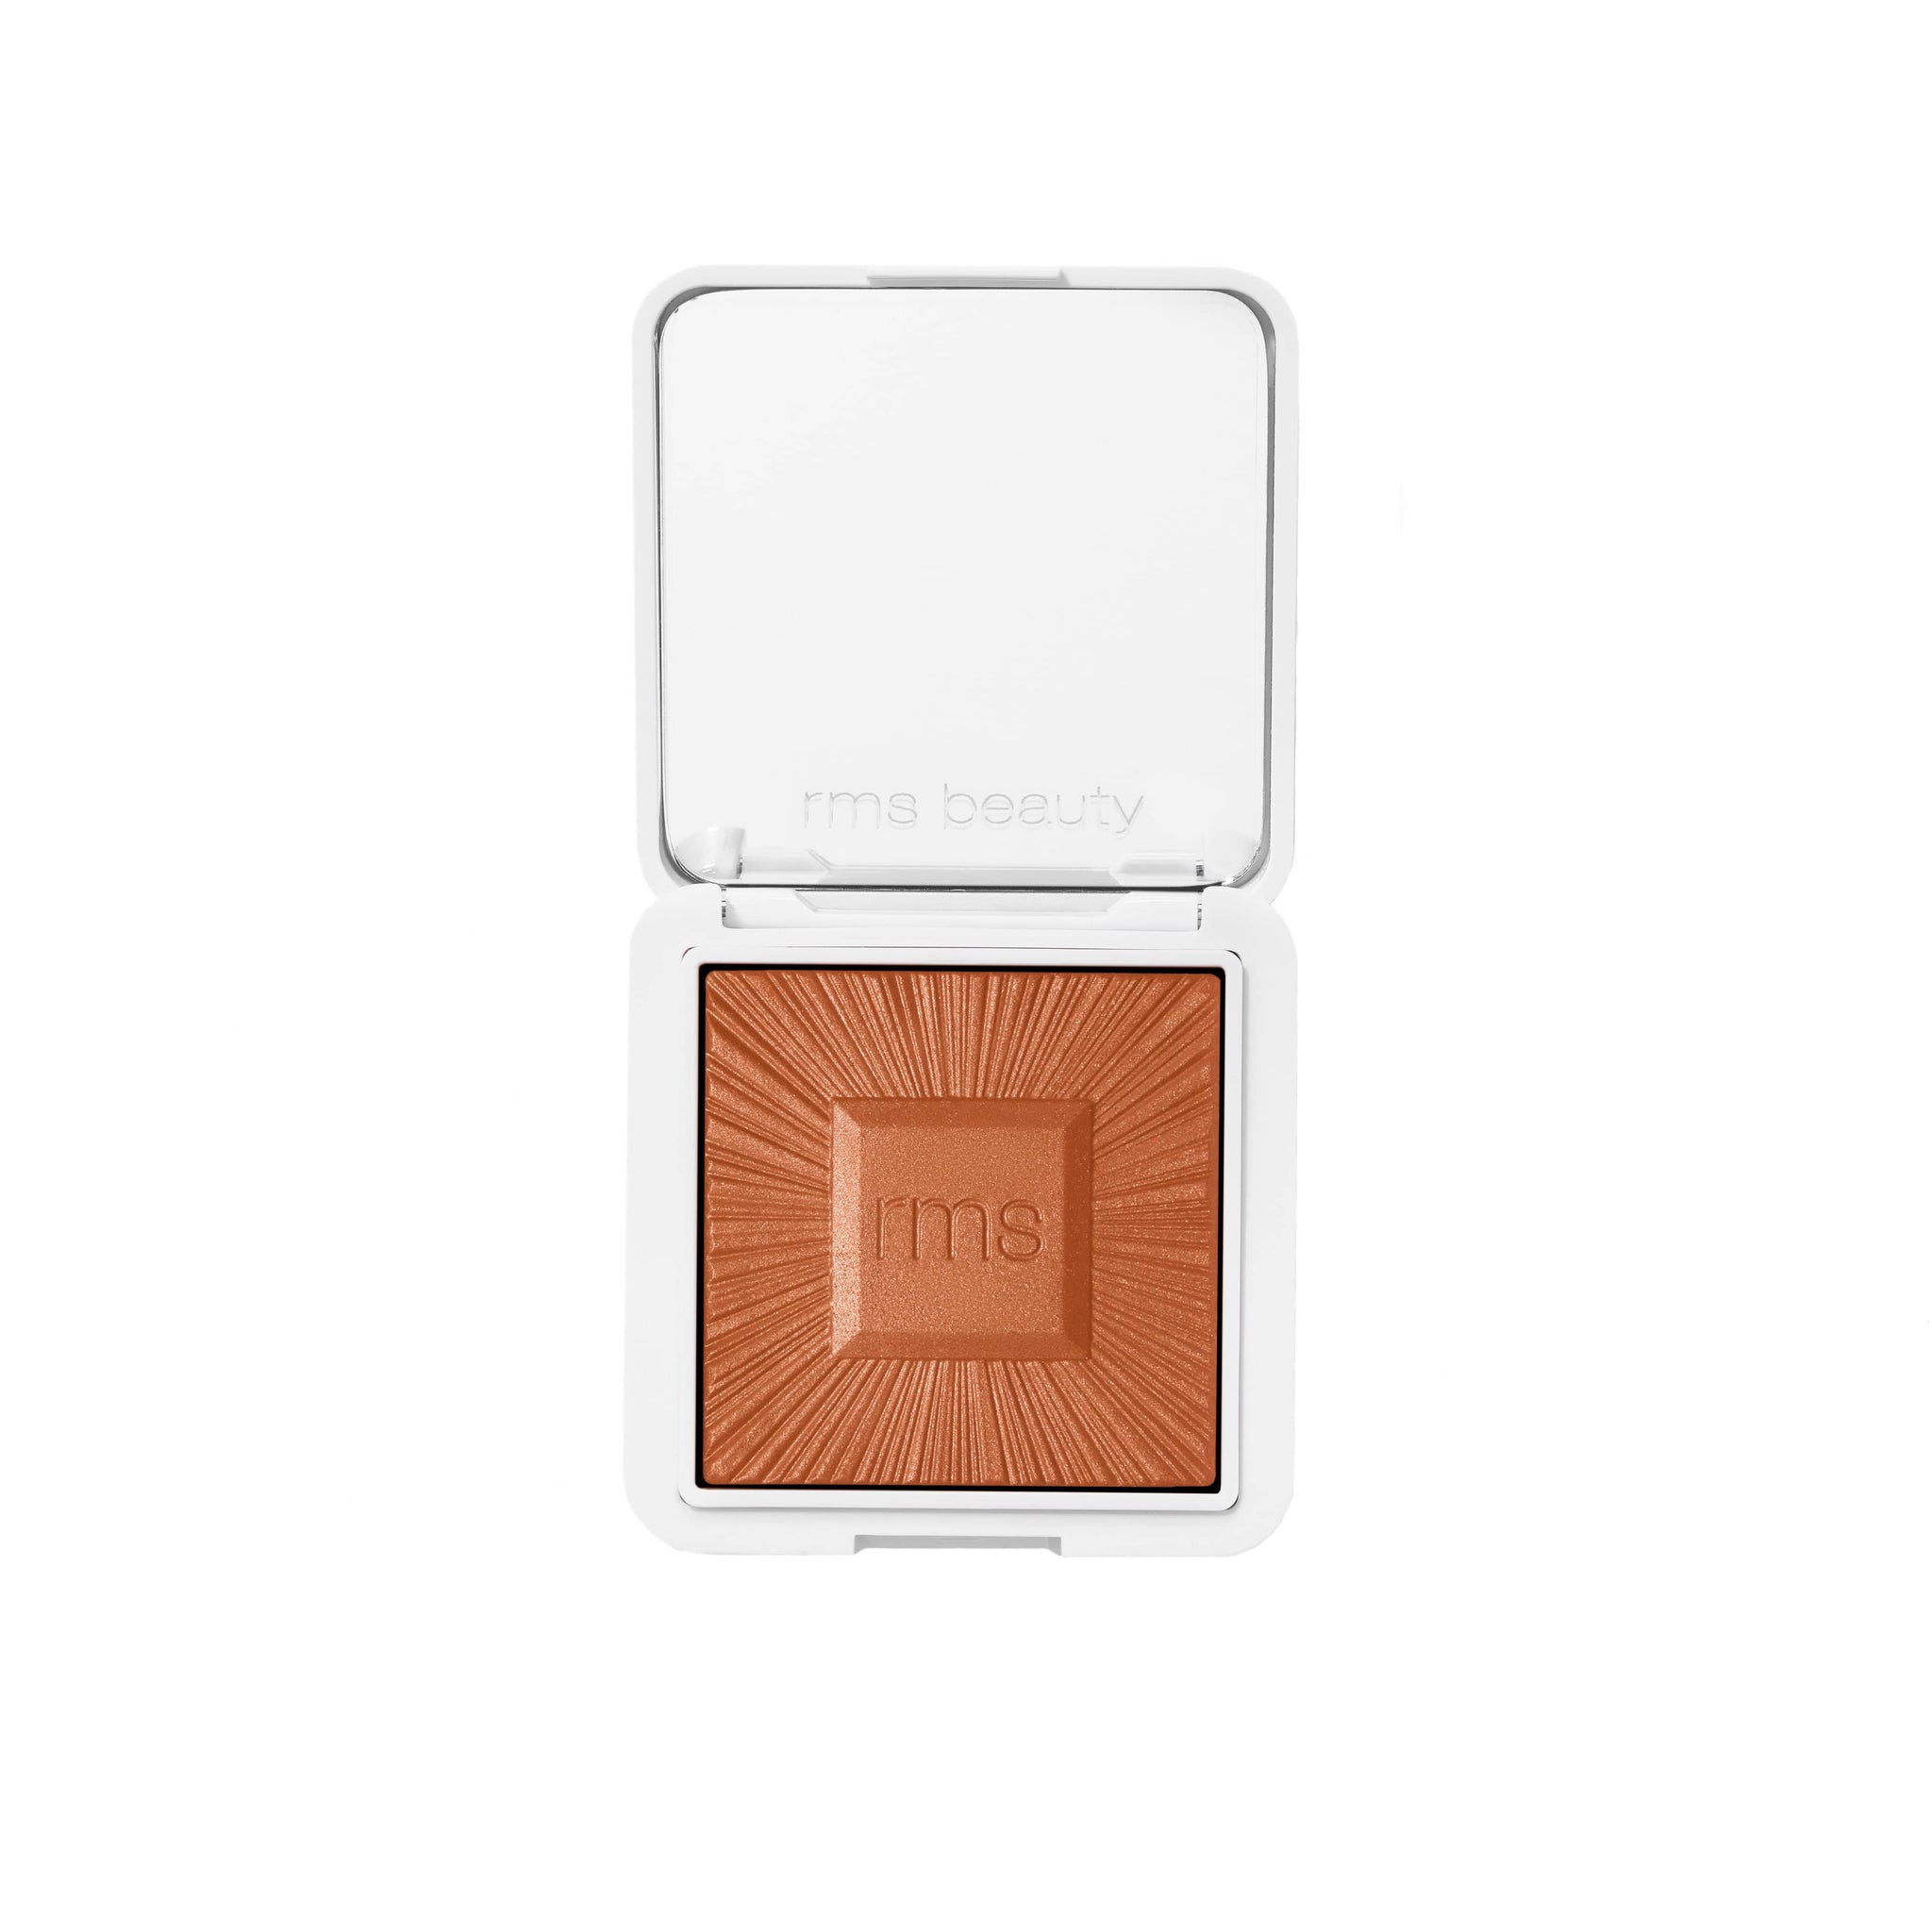 RMS - ReDimension Hydra Bronzer - The Natural Beauty Club